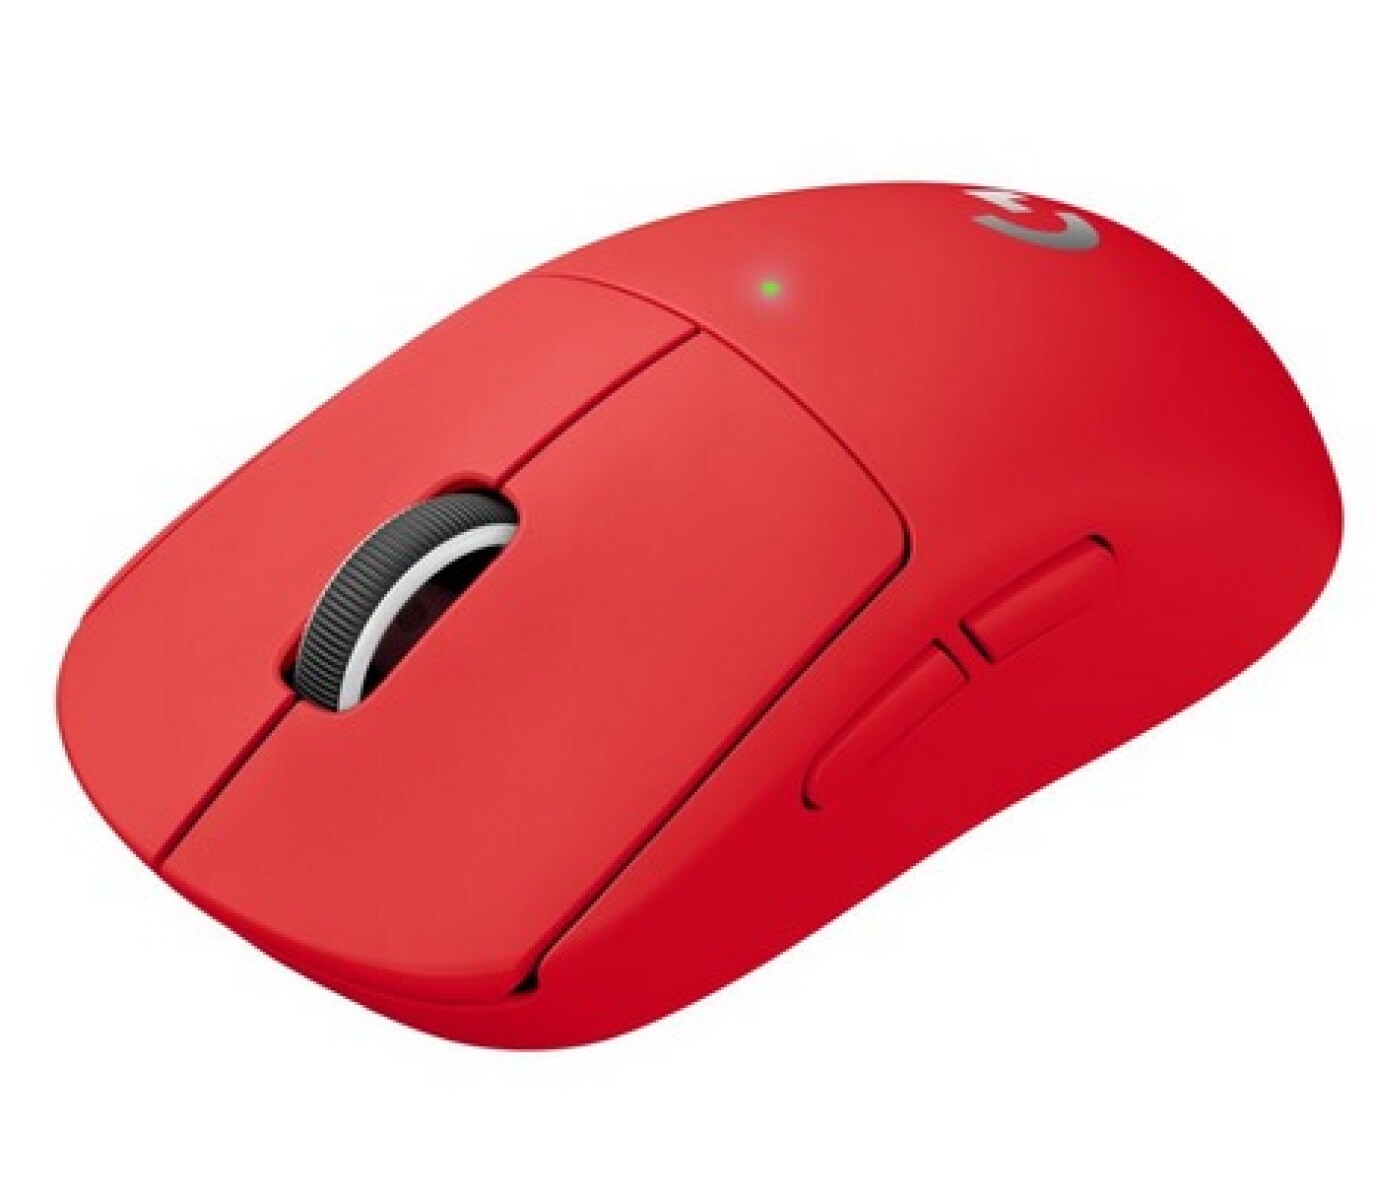 LOGITECH 910-006783 MOUSE PRO X SUPERLIGHT GAMING RED INAL - Logitech 910-006783 Mouse Pro X Superlight Gaming Red Inal 